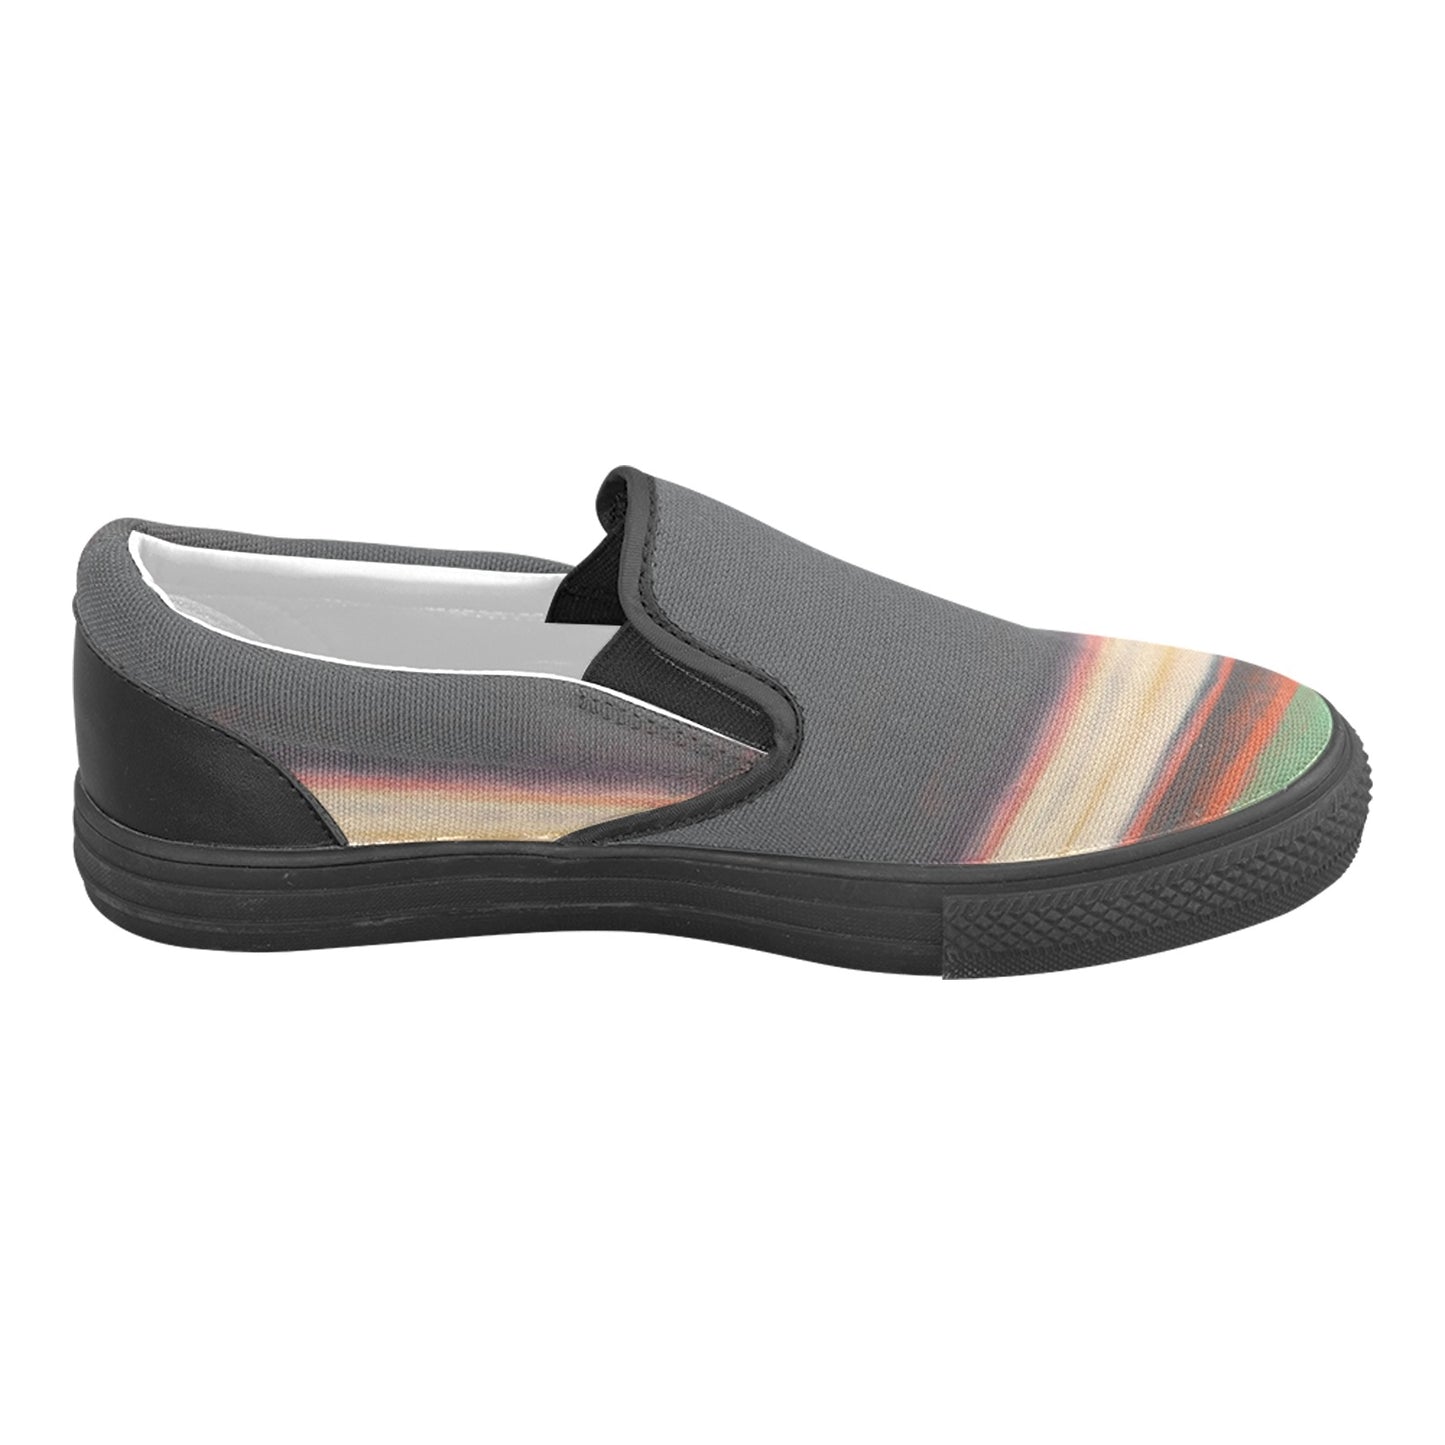 a pair of slip ons with a multicolored pattern